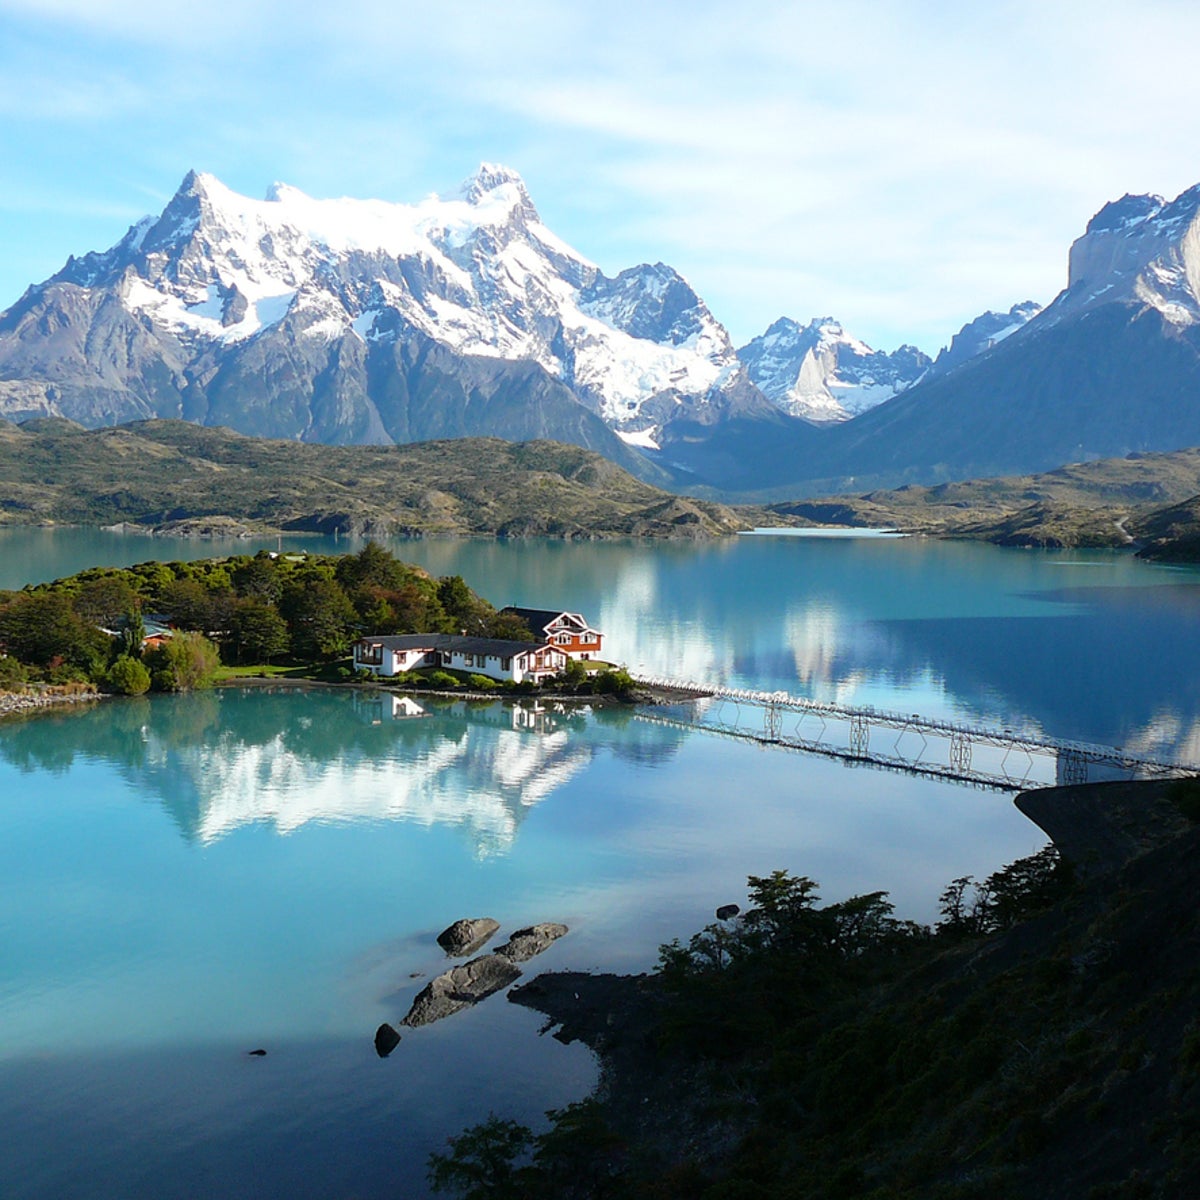 How to visit Chile's Torres del Paine National Park sustainably